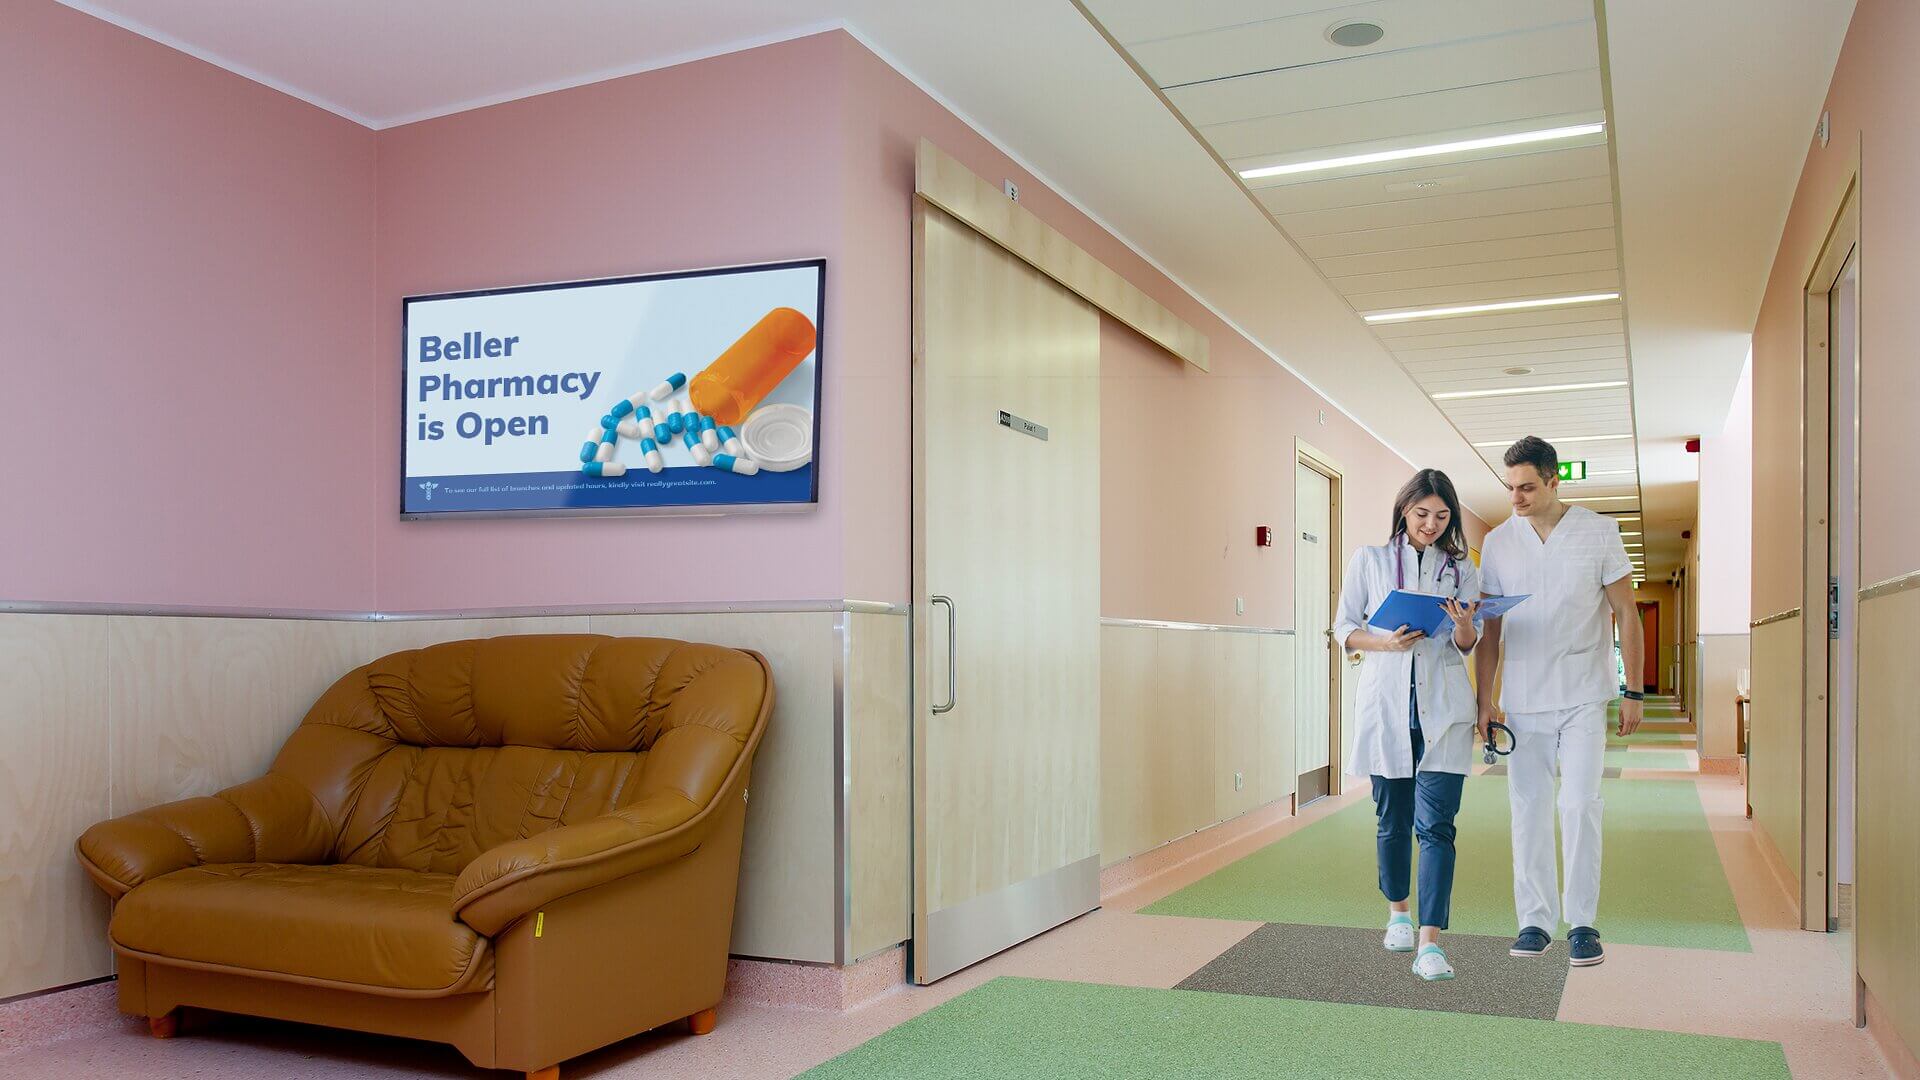 Digital signage in a healthcare facility waiting room advertising pharmaceutical products